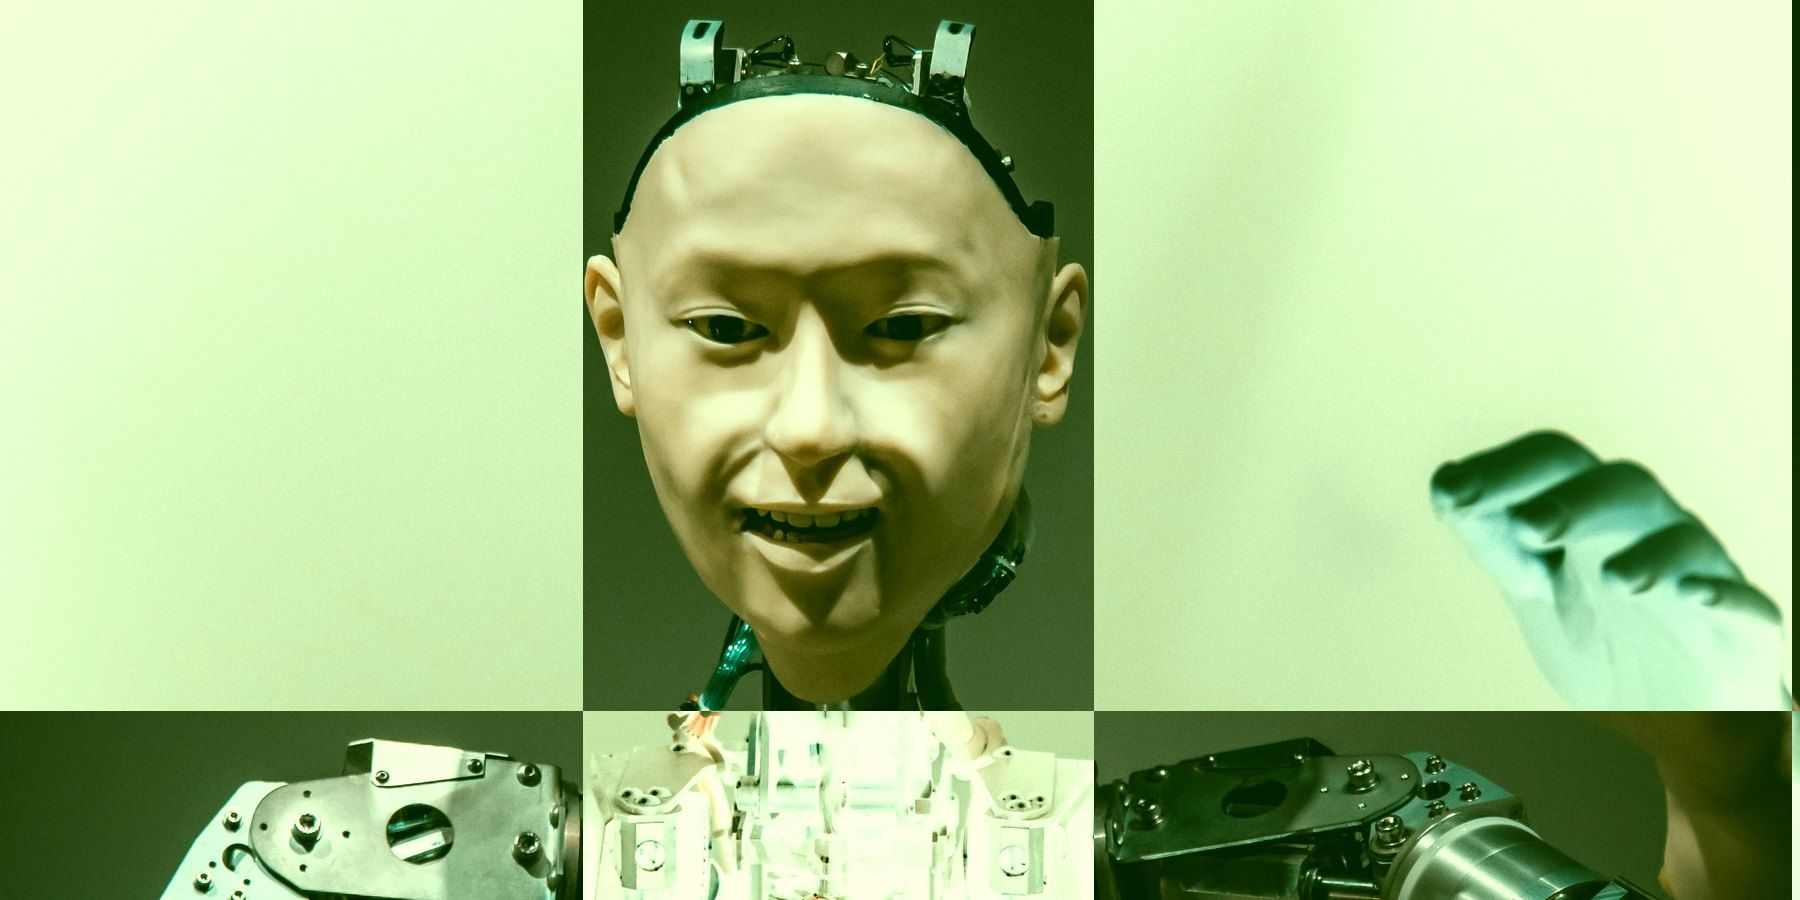 A robot with synthetic face